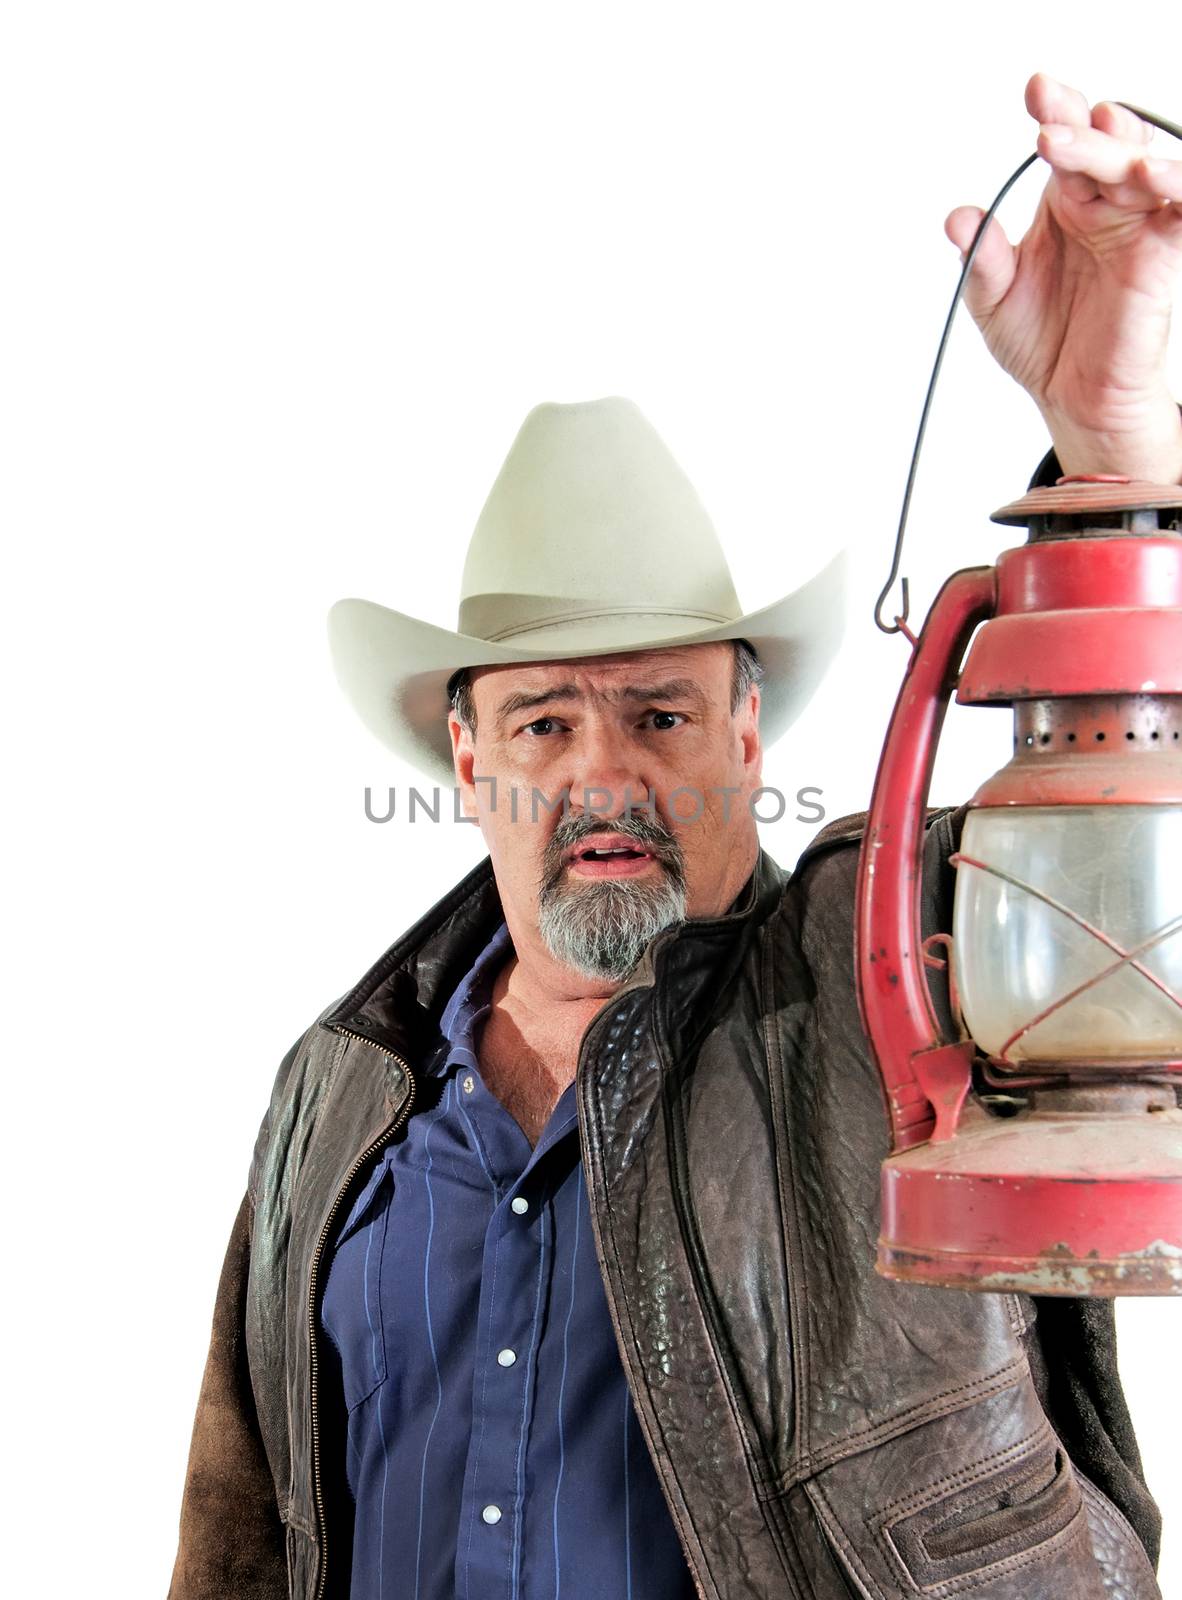 Mature cowboy looking forward by light of his handheld kerosene lantern. Isolated on a white background.